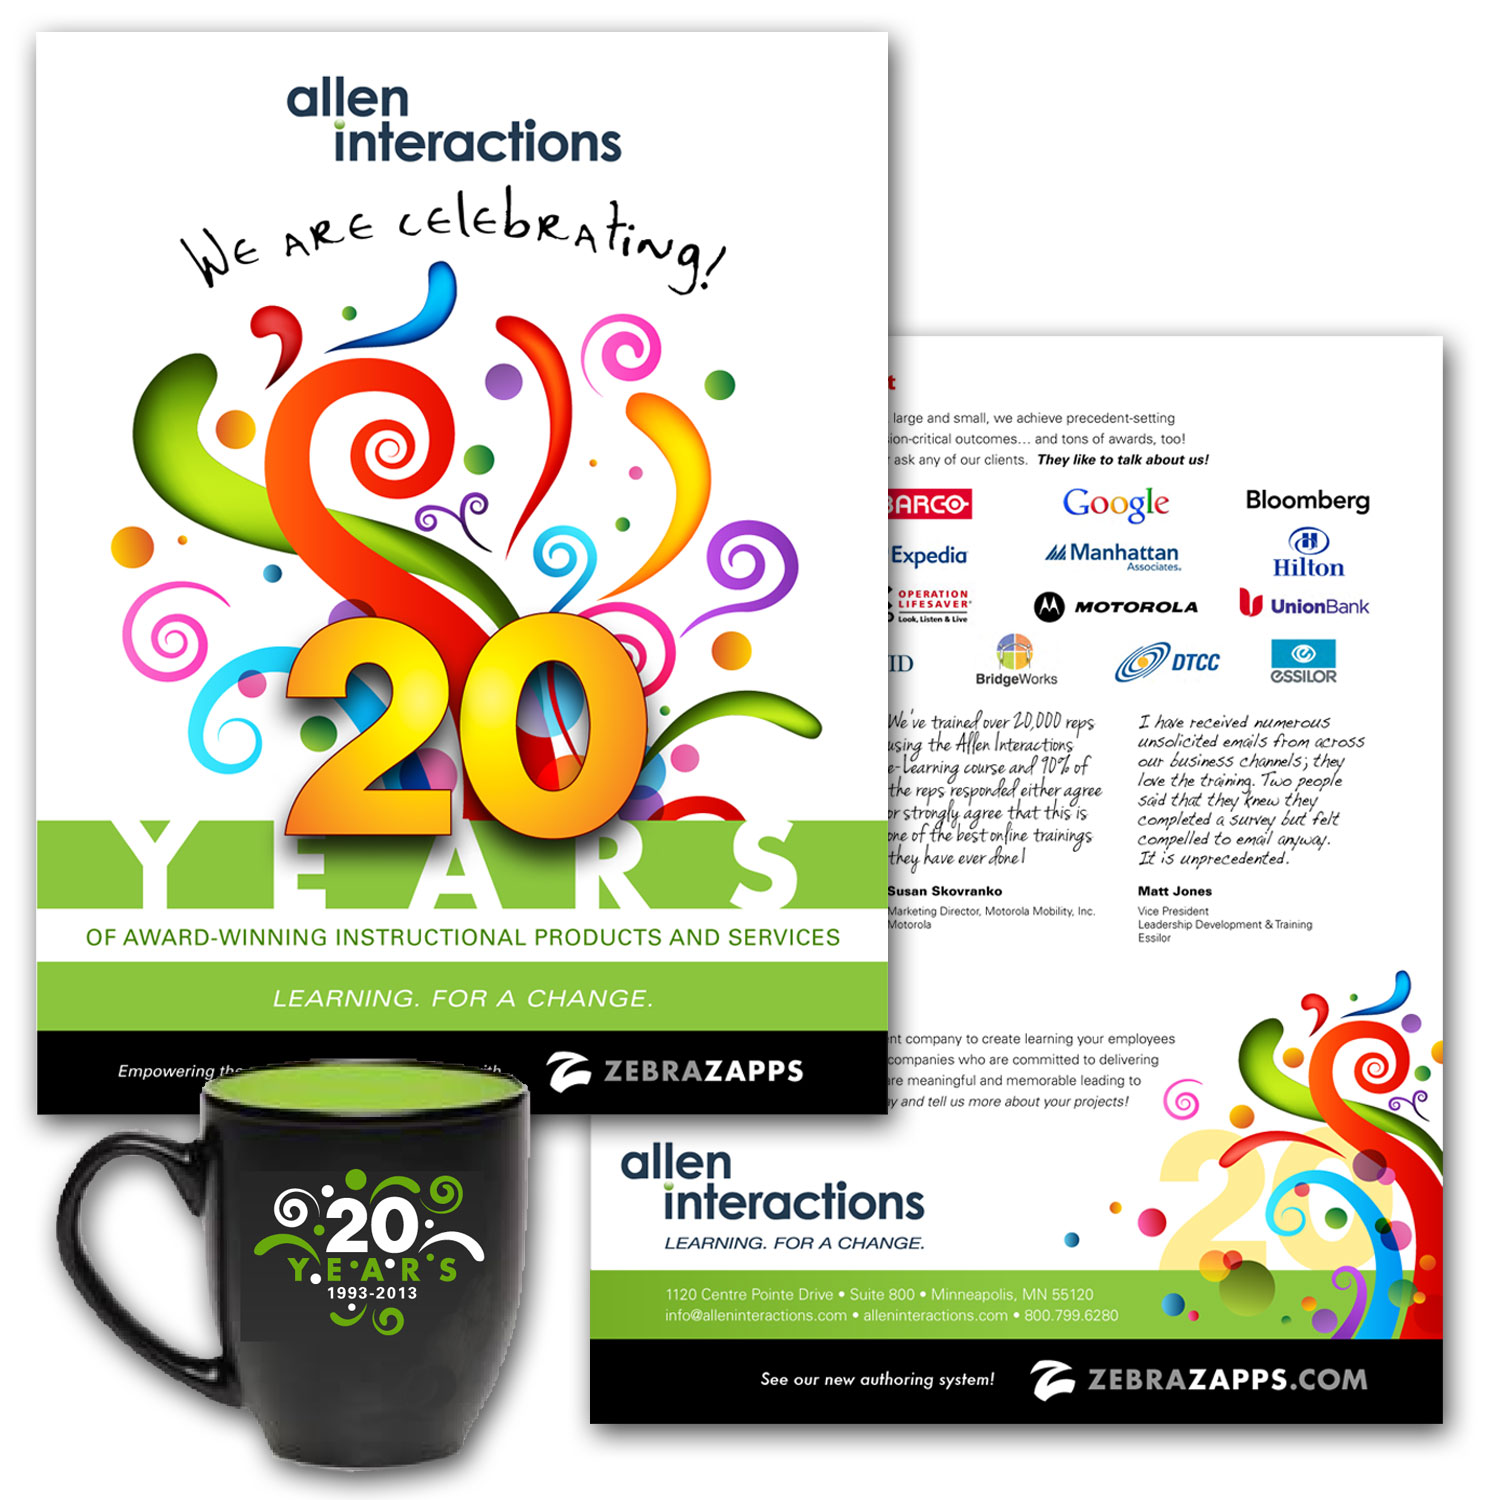   We are Celebrating!   Allen Interactions     This promotional brochure celebrated the 20th Anniversary of Allen Interactions. It featured their work and mission, and set the stage for a year-long celebration. __________    